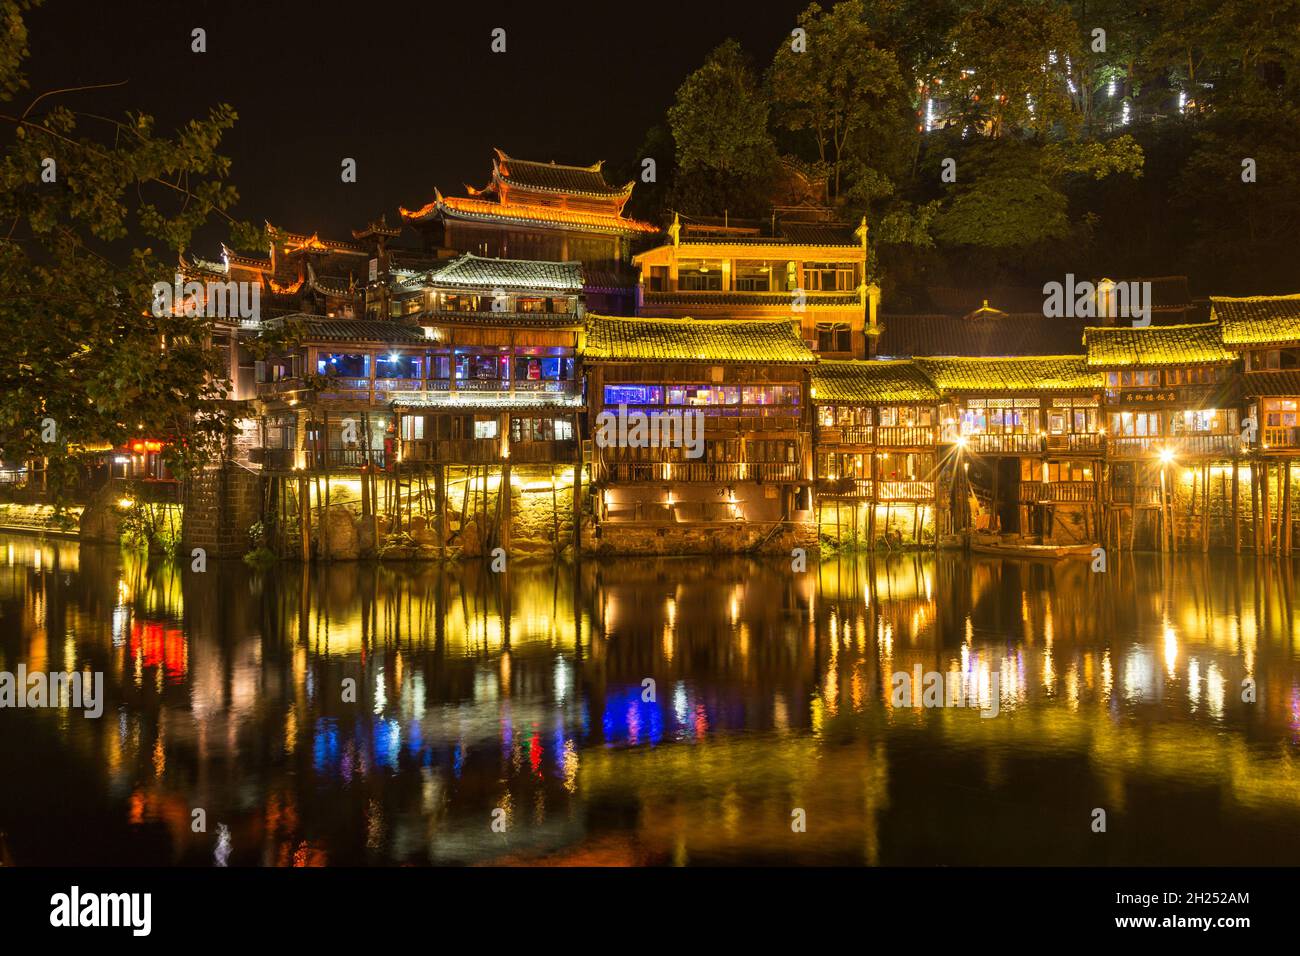 Traditional Diaojiao-style Chinese buildings lit up at night along the Tuojiang River in Fenghuang, China. Stock Photo